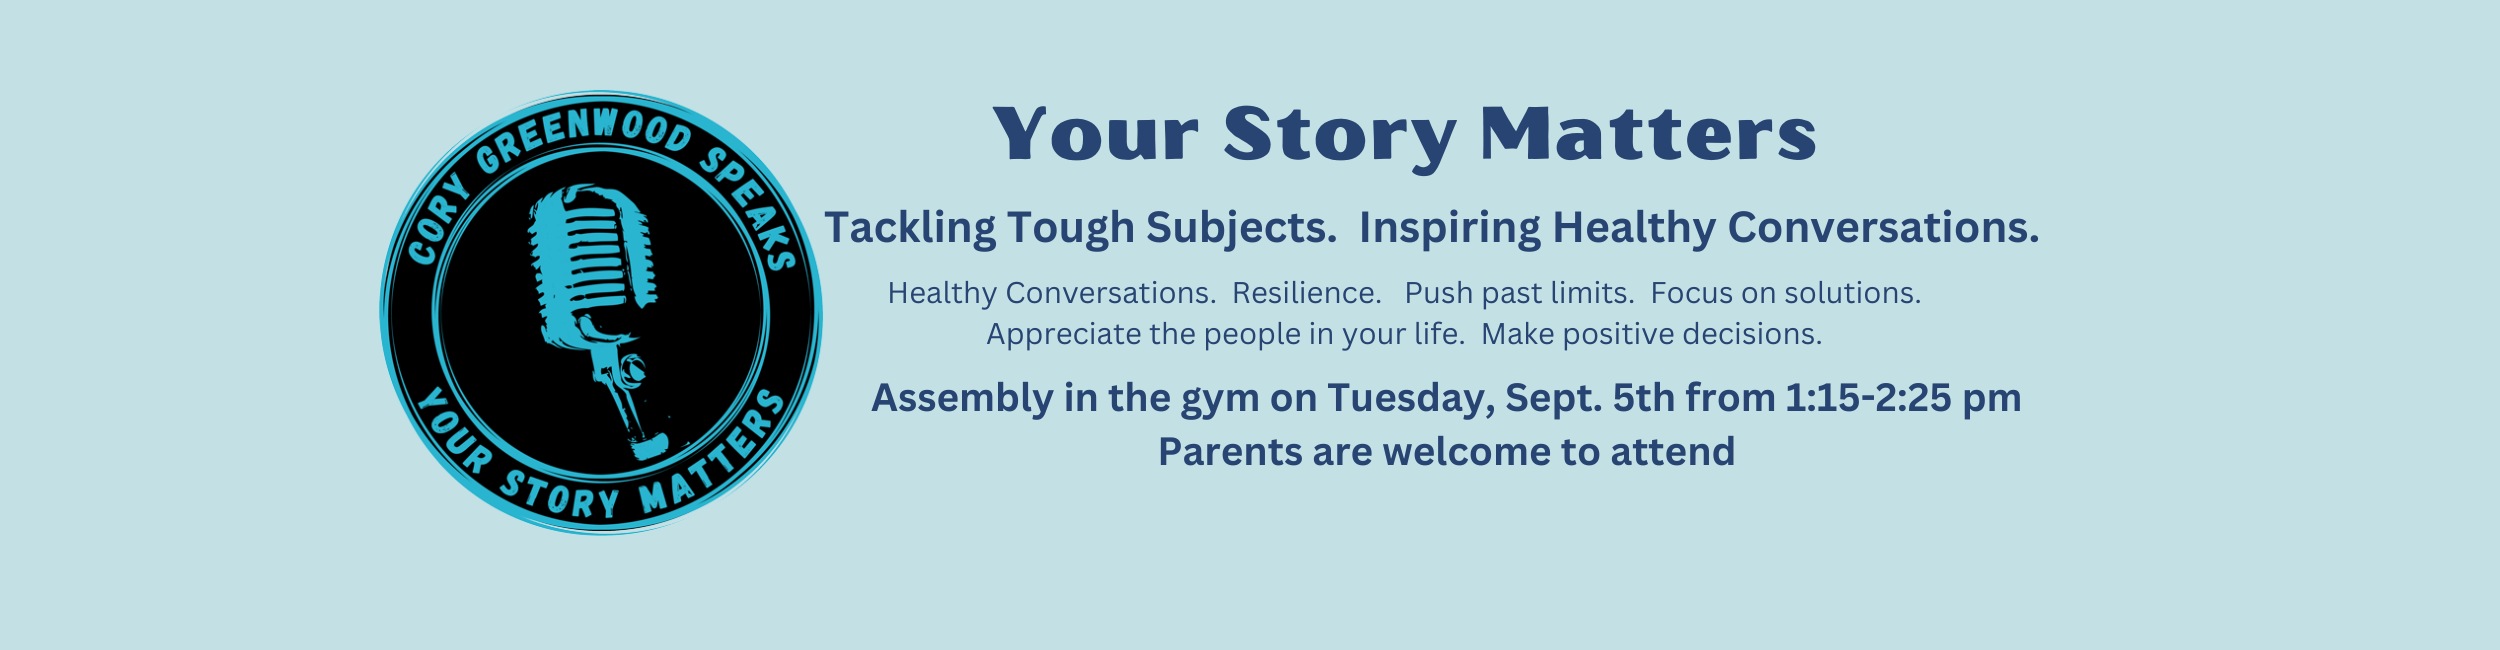 Your Story Matters: Tackling Tough Subjects. Inspiring Healthy Conversations. CORY GREENWOOD